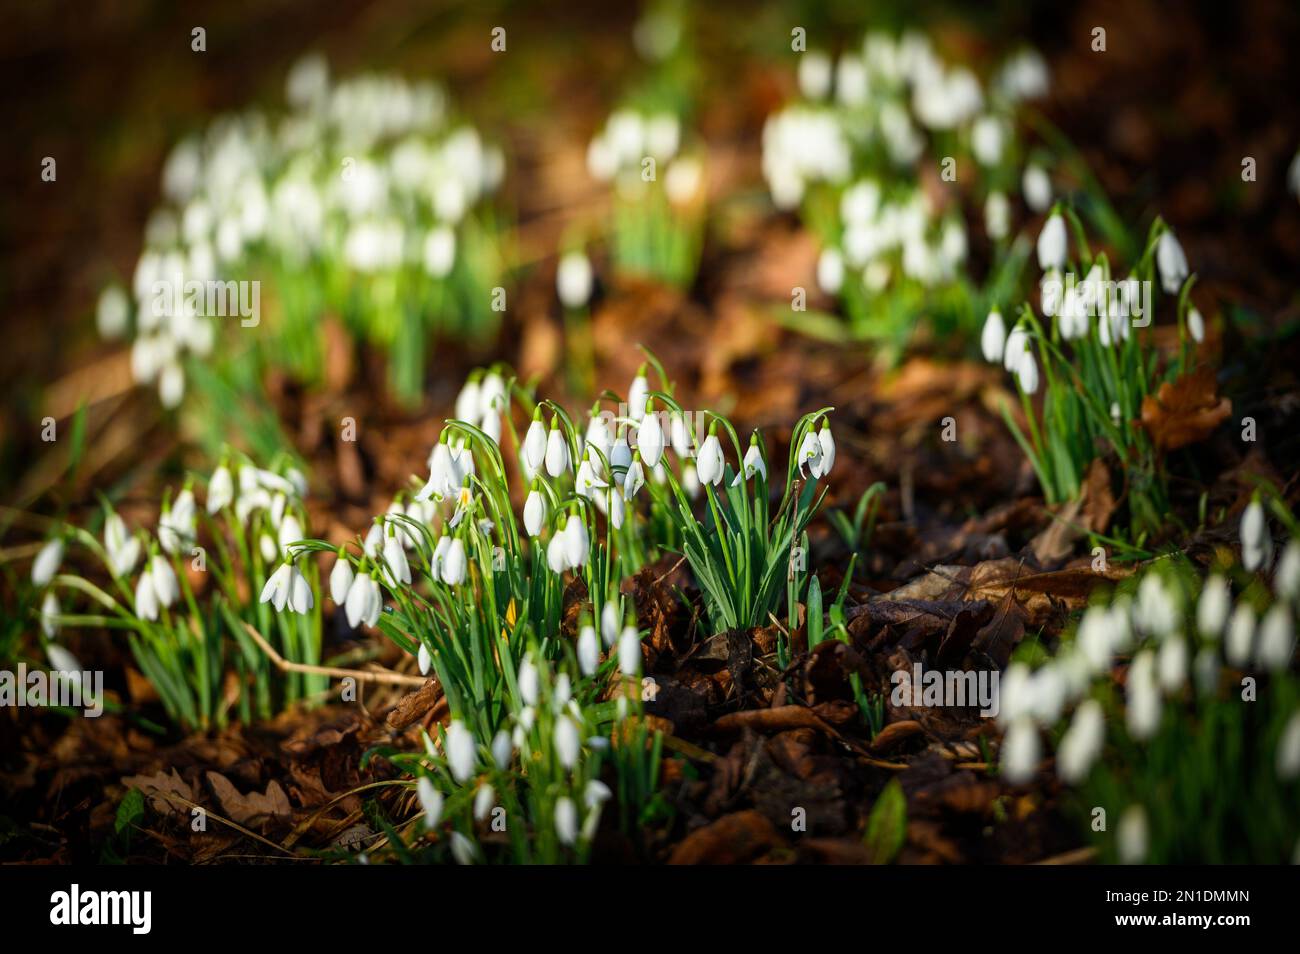 Bolton, Lancashire, UK, Monday February 06, 2023. A beautiful crop of Snowdrops decorate the paths around Queen's Park, Bolton. The start of the working week gets under way with bright sunshine and blue skies in Lancashire. Credit: Paul Heyes/Alamy News Live Stock Photo